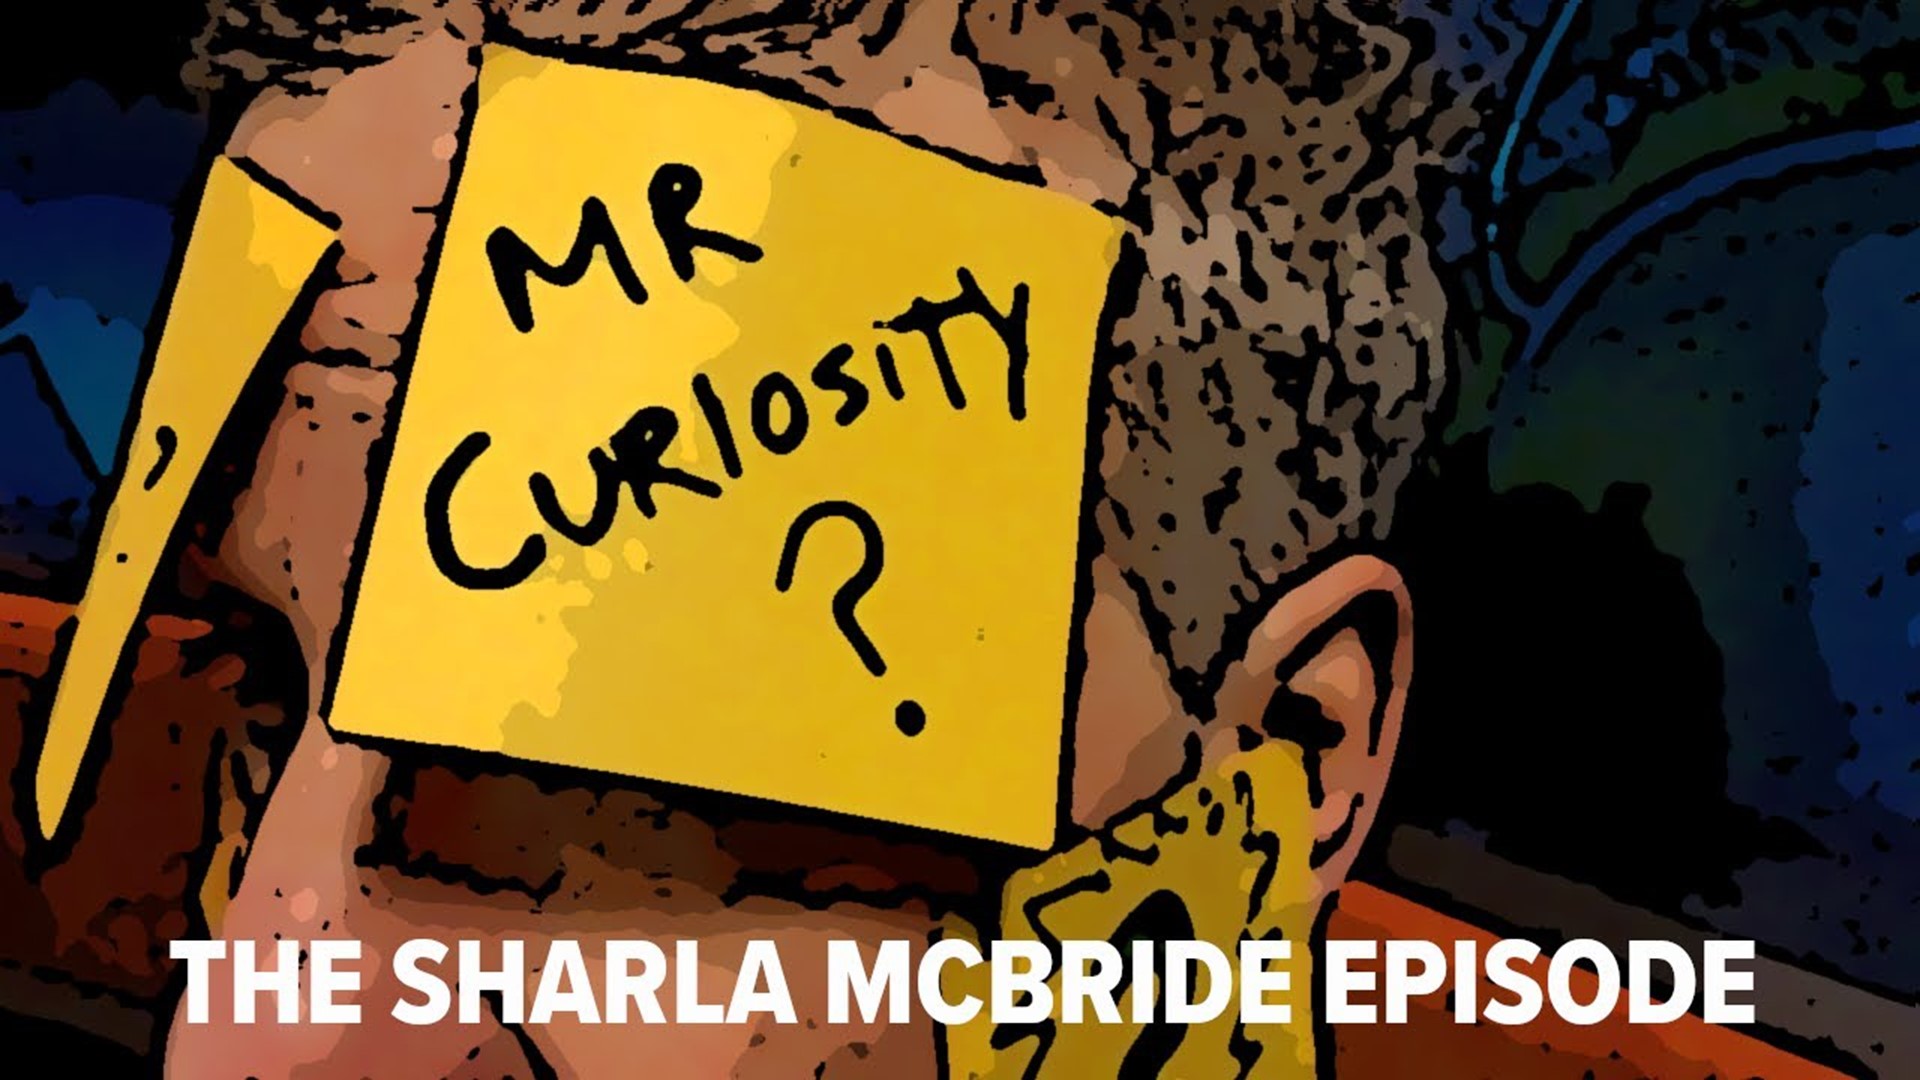 In this episode of "Mr. Curiosity," Joe catches up with former Newswatch 16 reporter and anchor Sharla McBride.